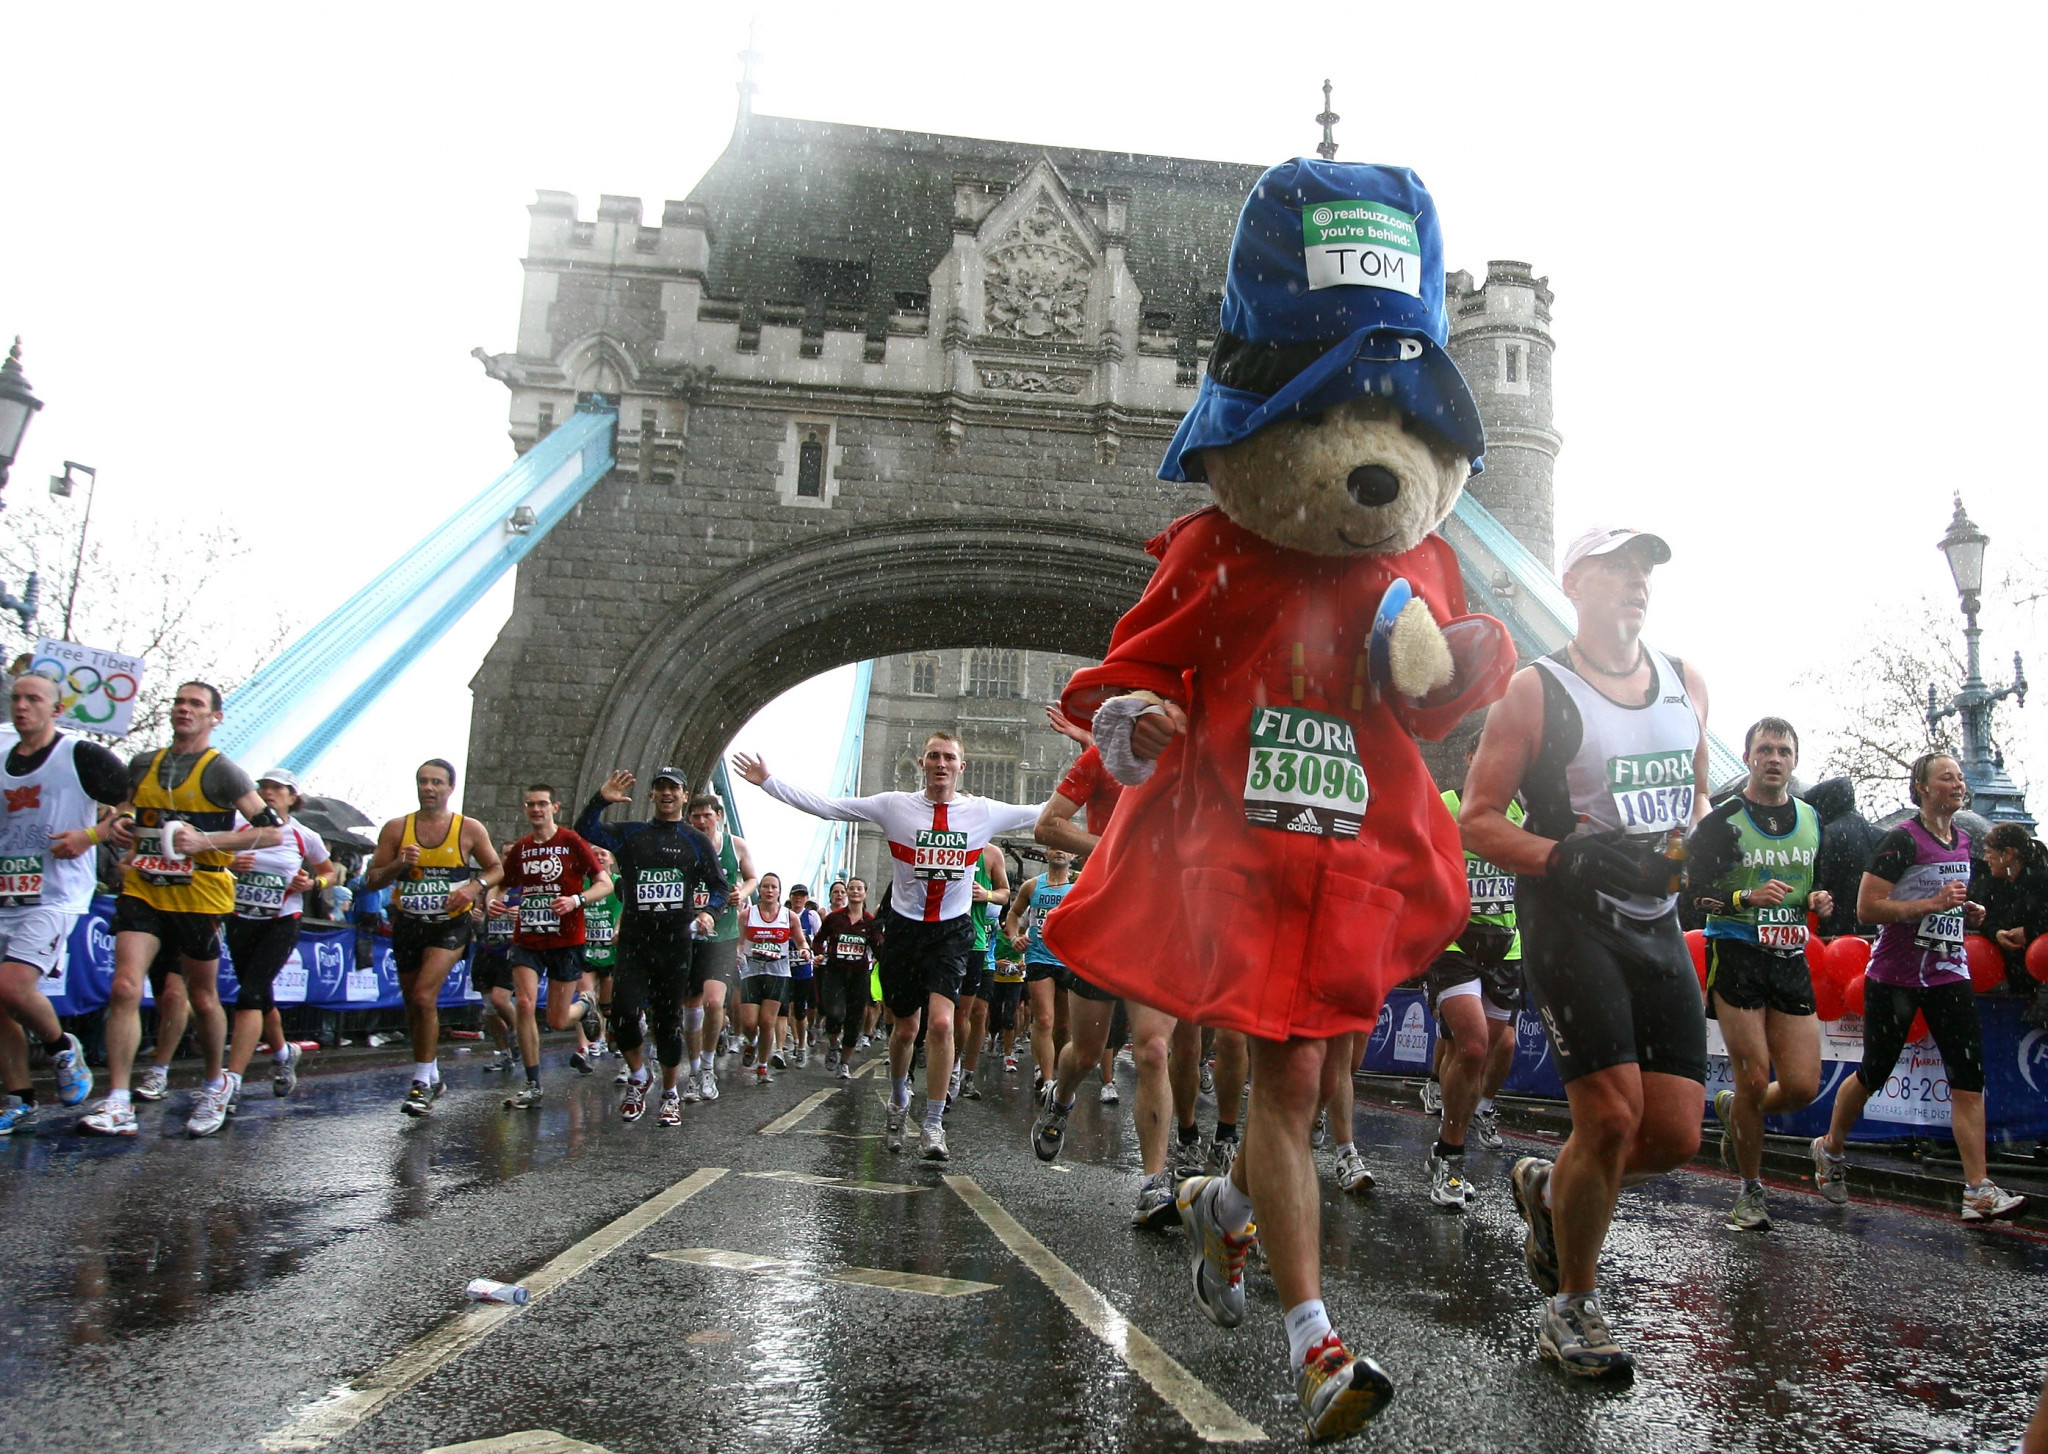 Flora was the title sponsor of the London Marathon for 14 years ©Getty Images